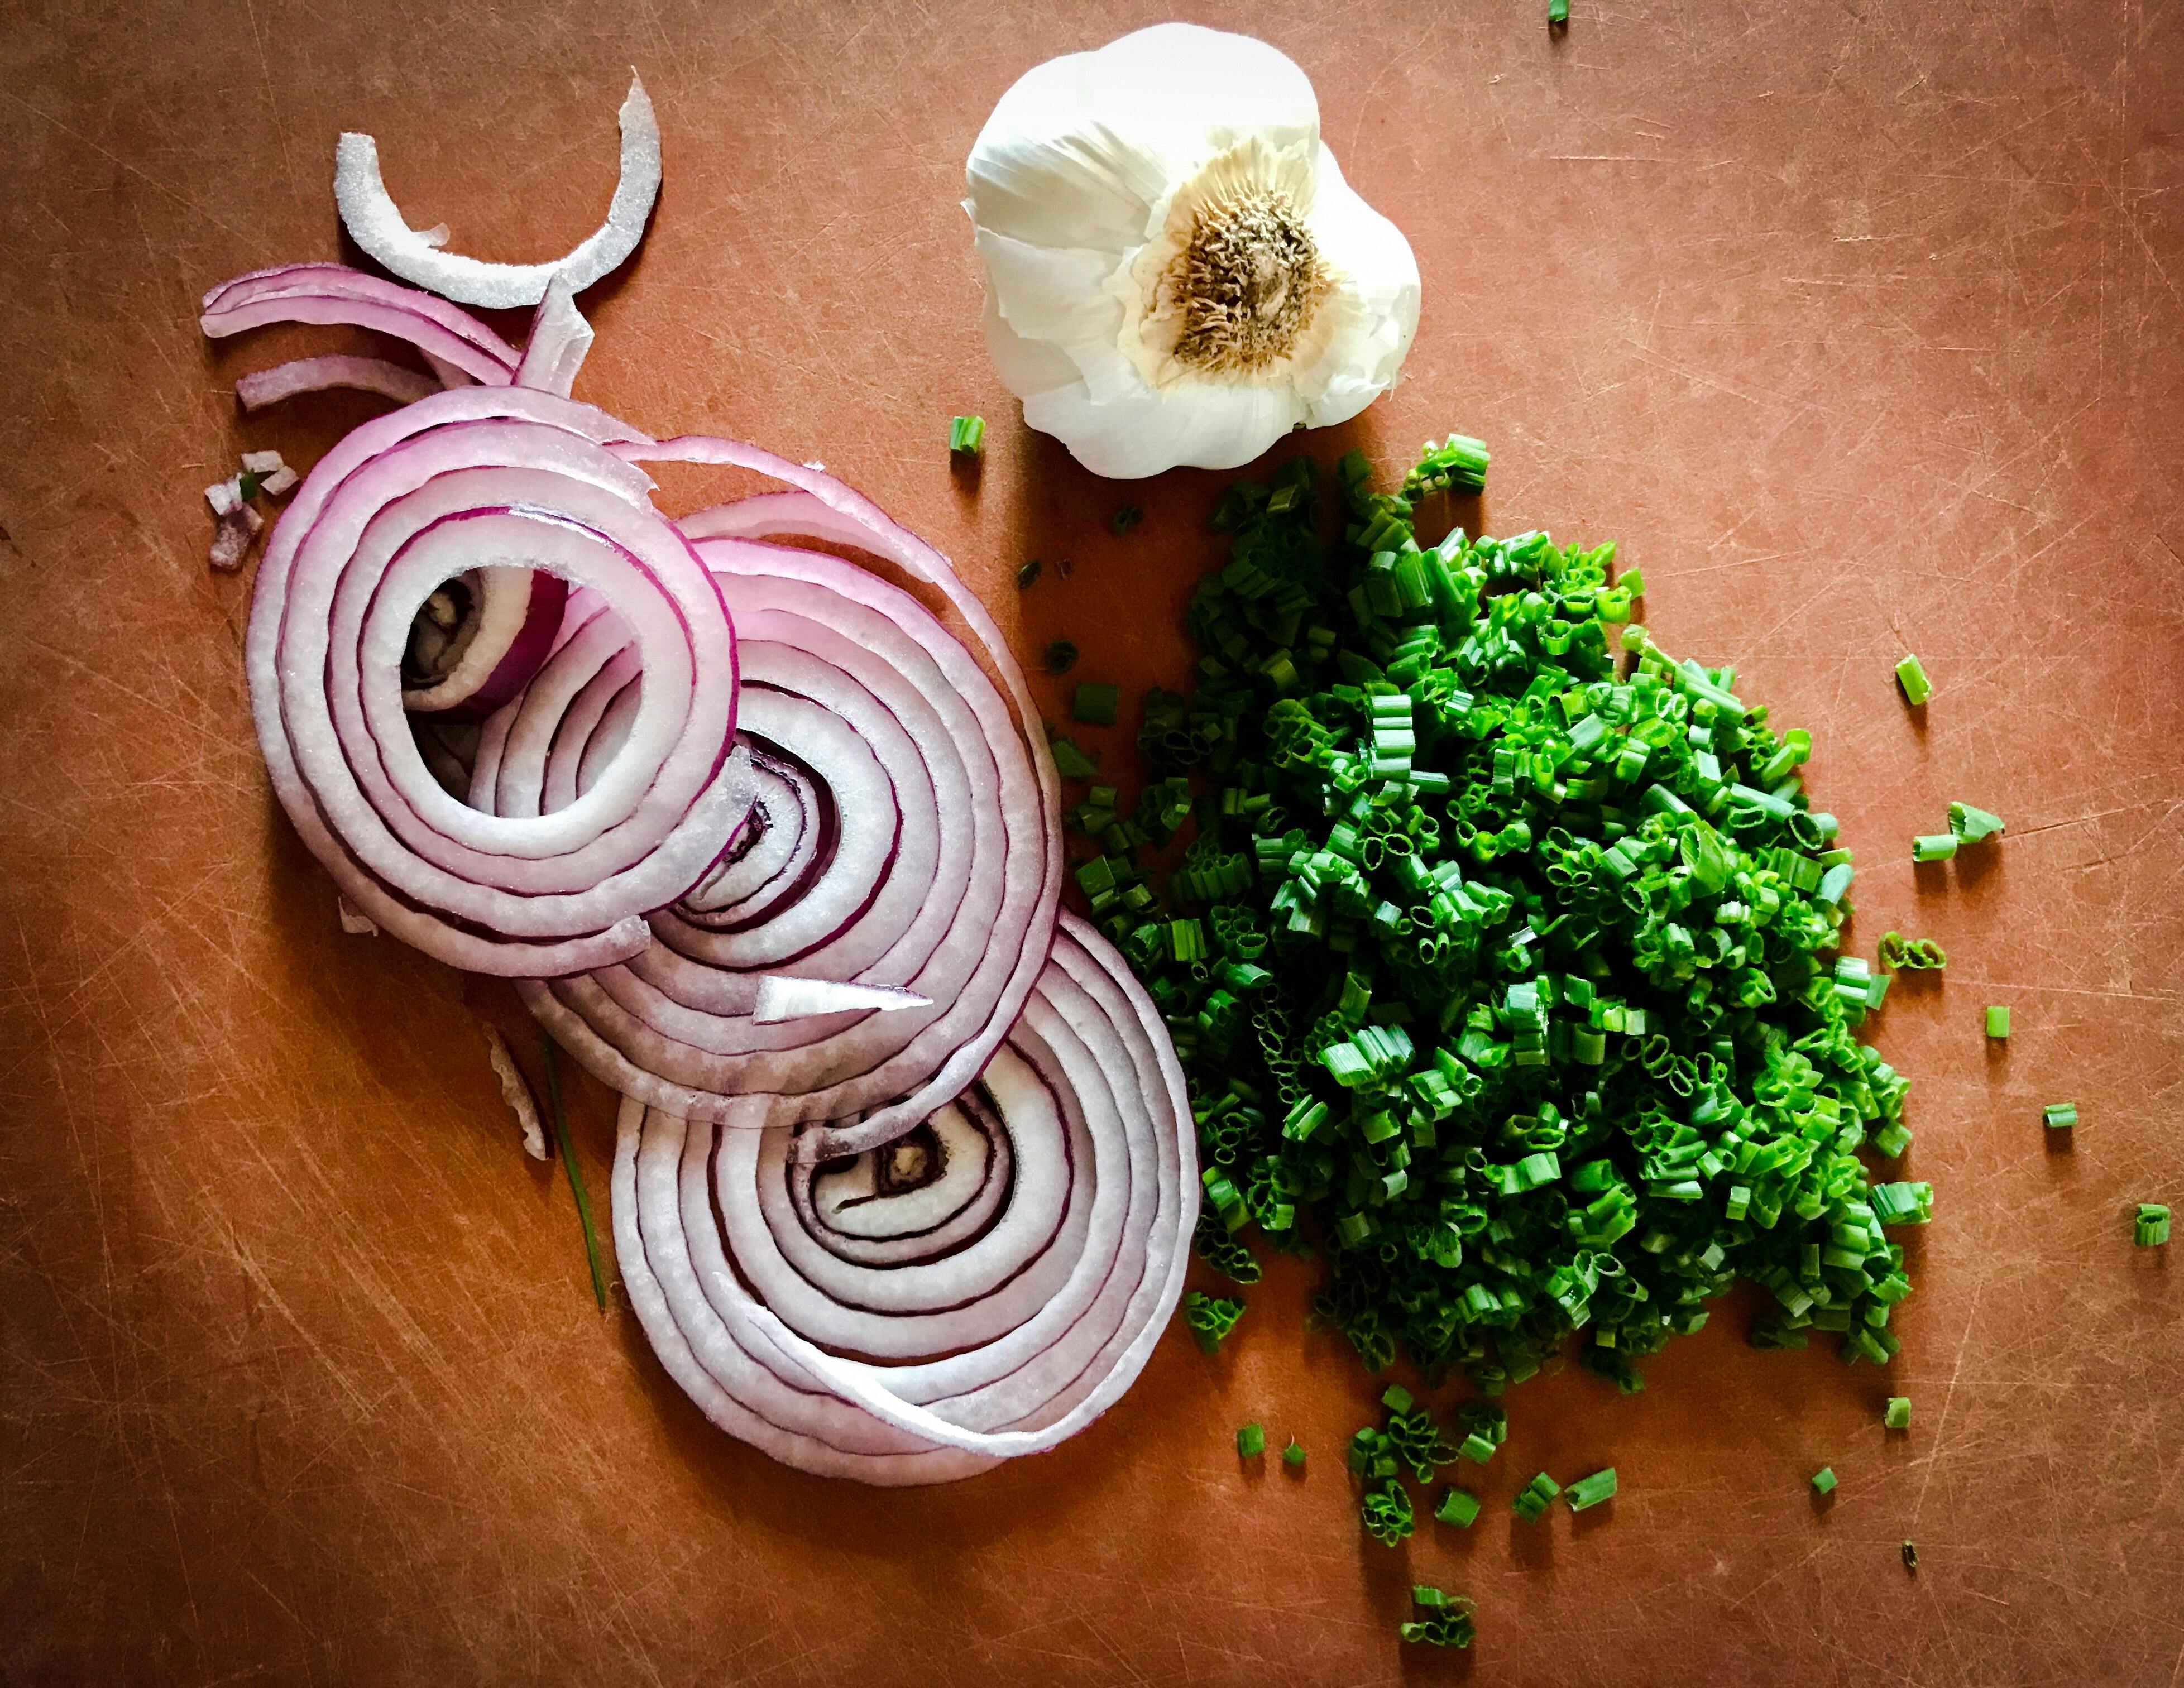 Free stock photo of chives, Chopped food, red onions